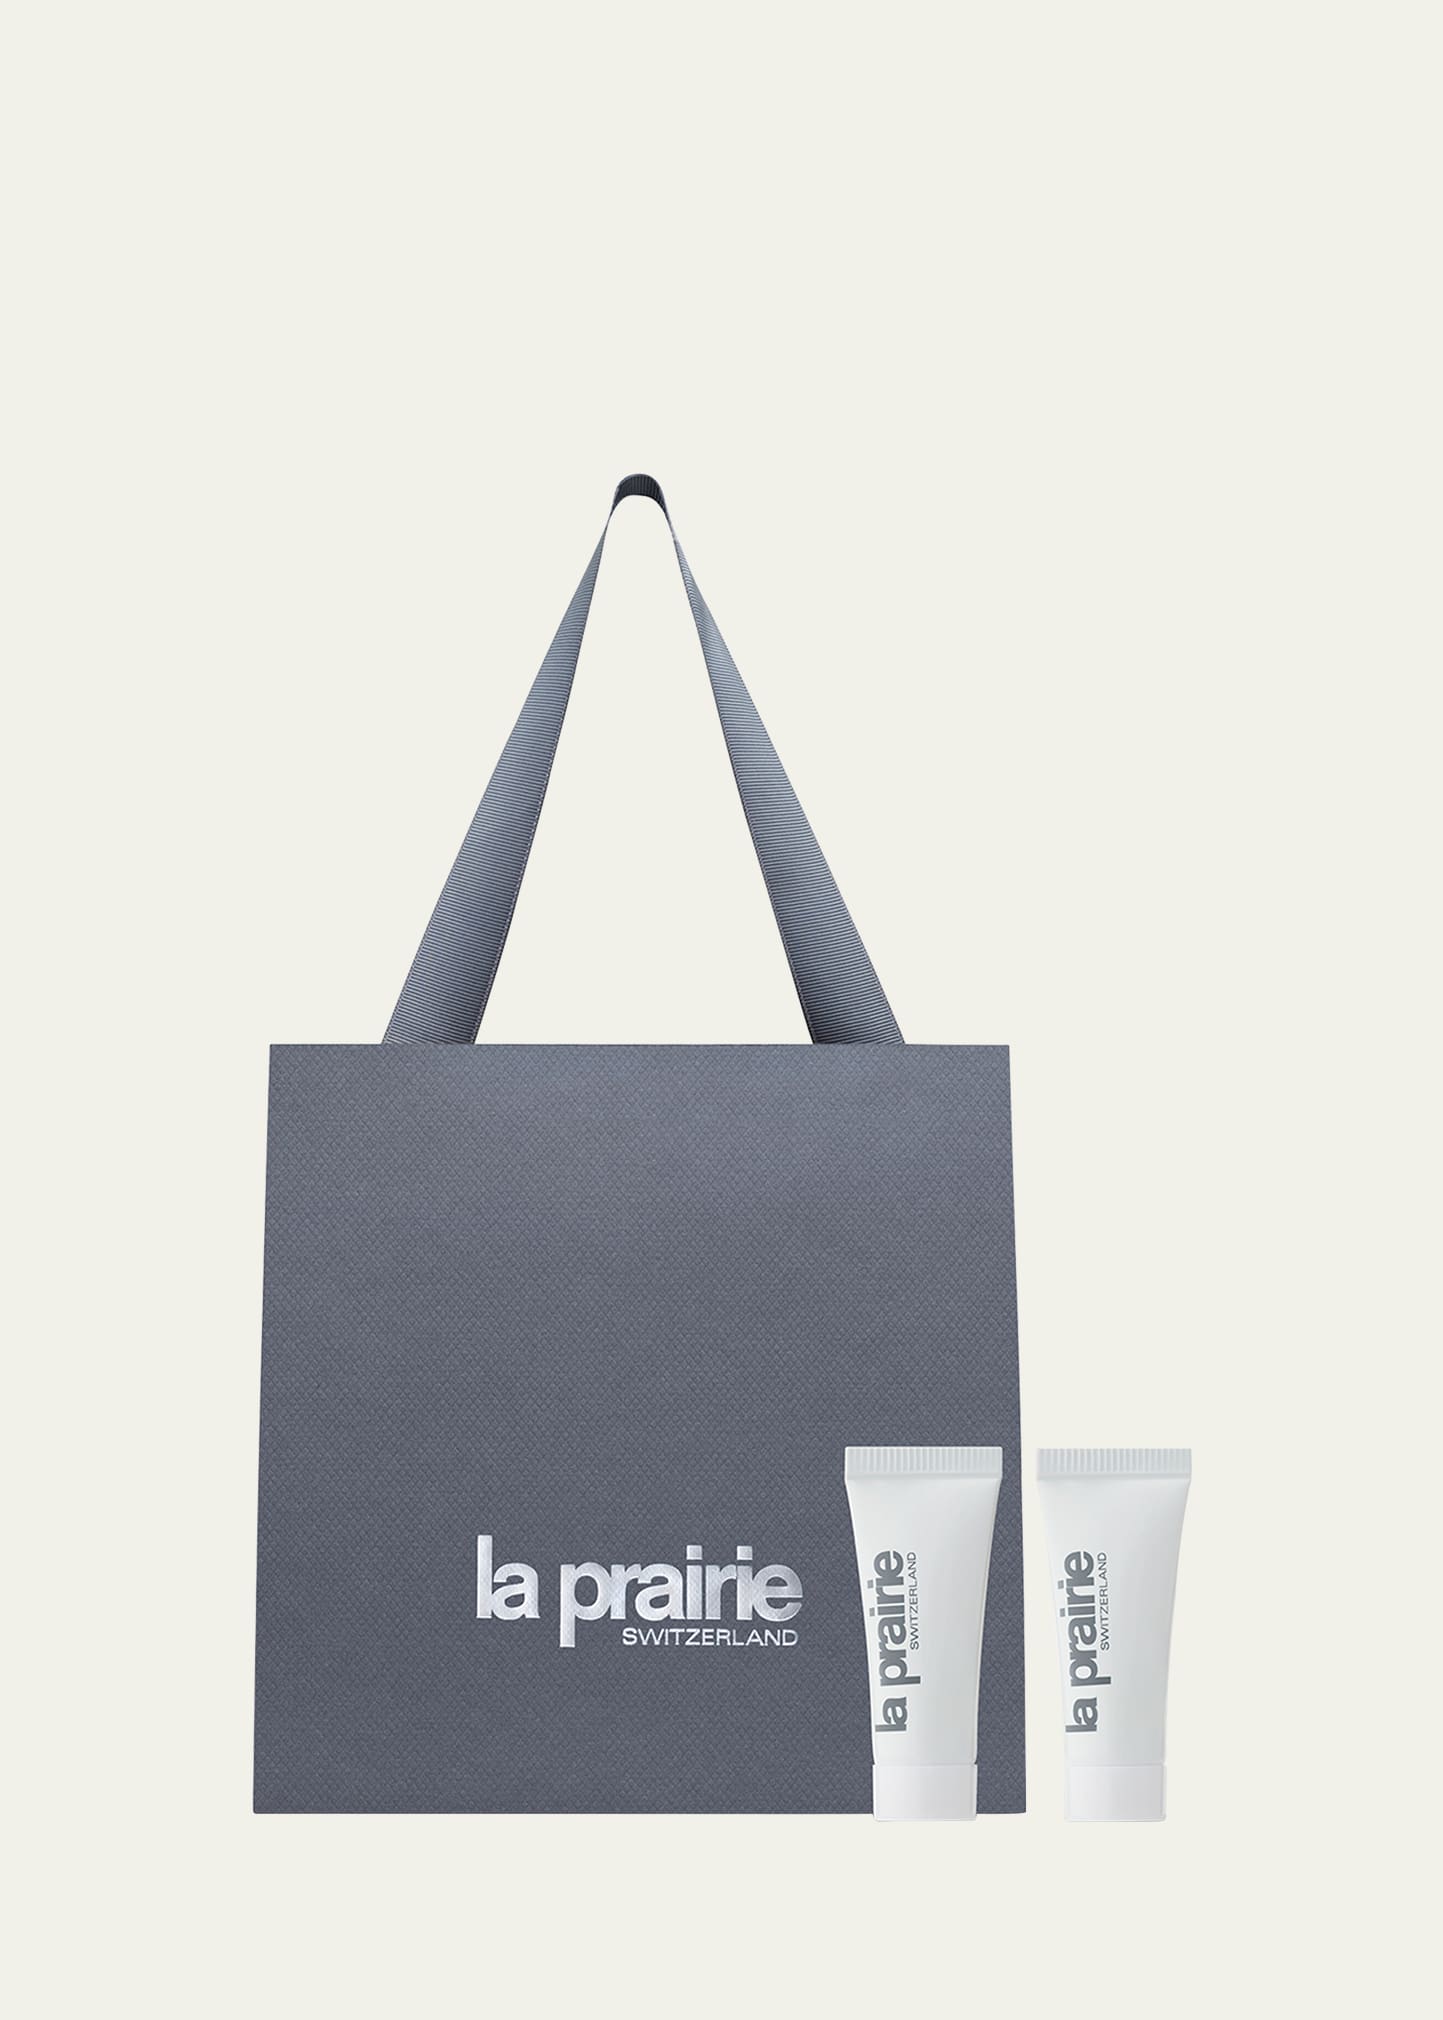 Skin Caviar Eye Duo, Yours with any $95 La Prairie purchase